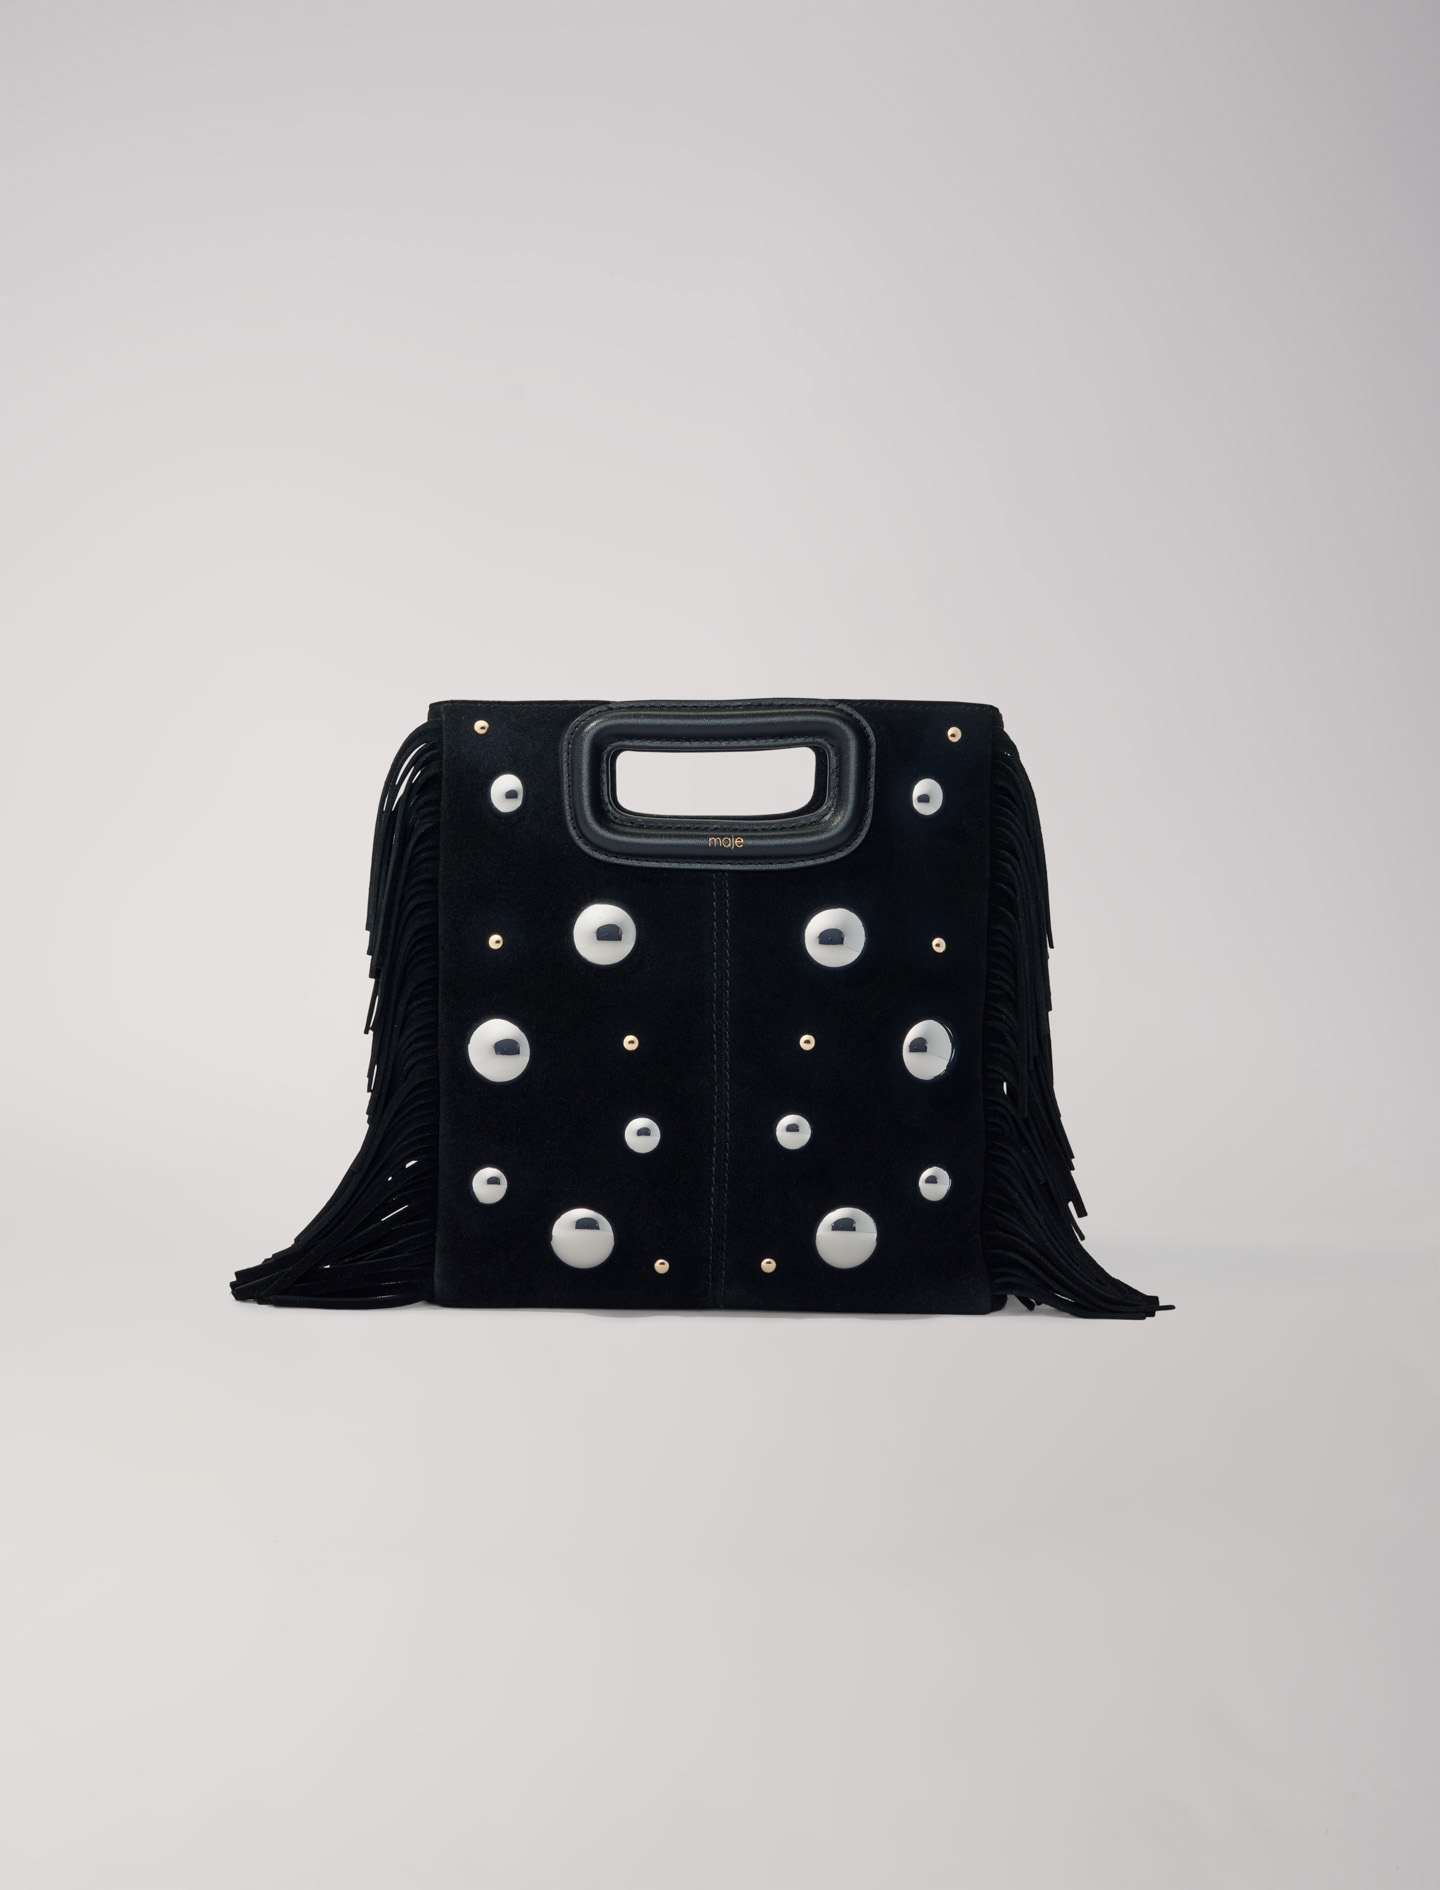 Maje Woman's polyester Rivet: M suede bag with studs for Spring/Summer, in color Black / Black